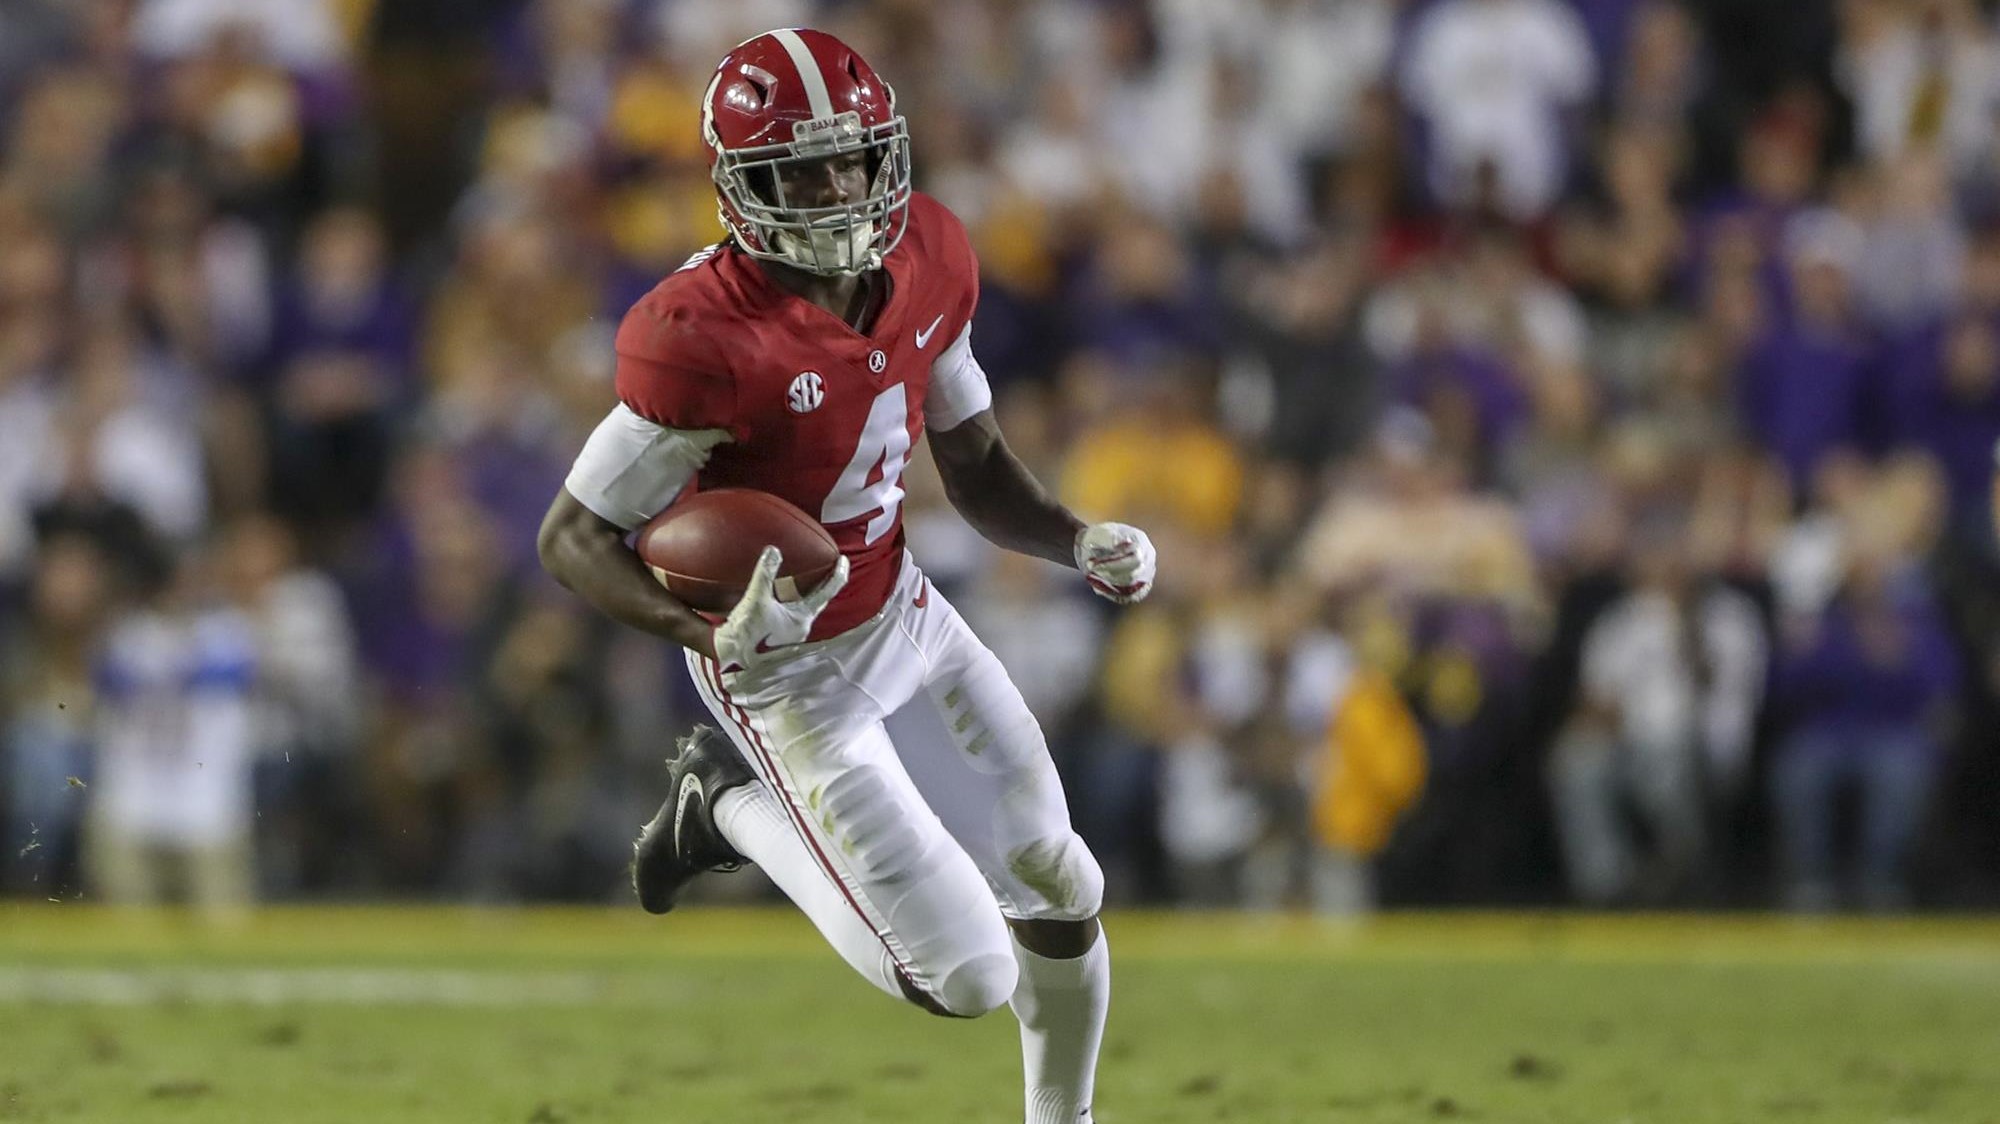 SPIN ZONE: At Alabama, Jeudy & Co. pile up moves, yards